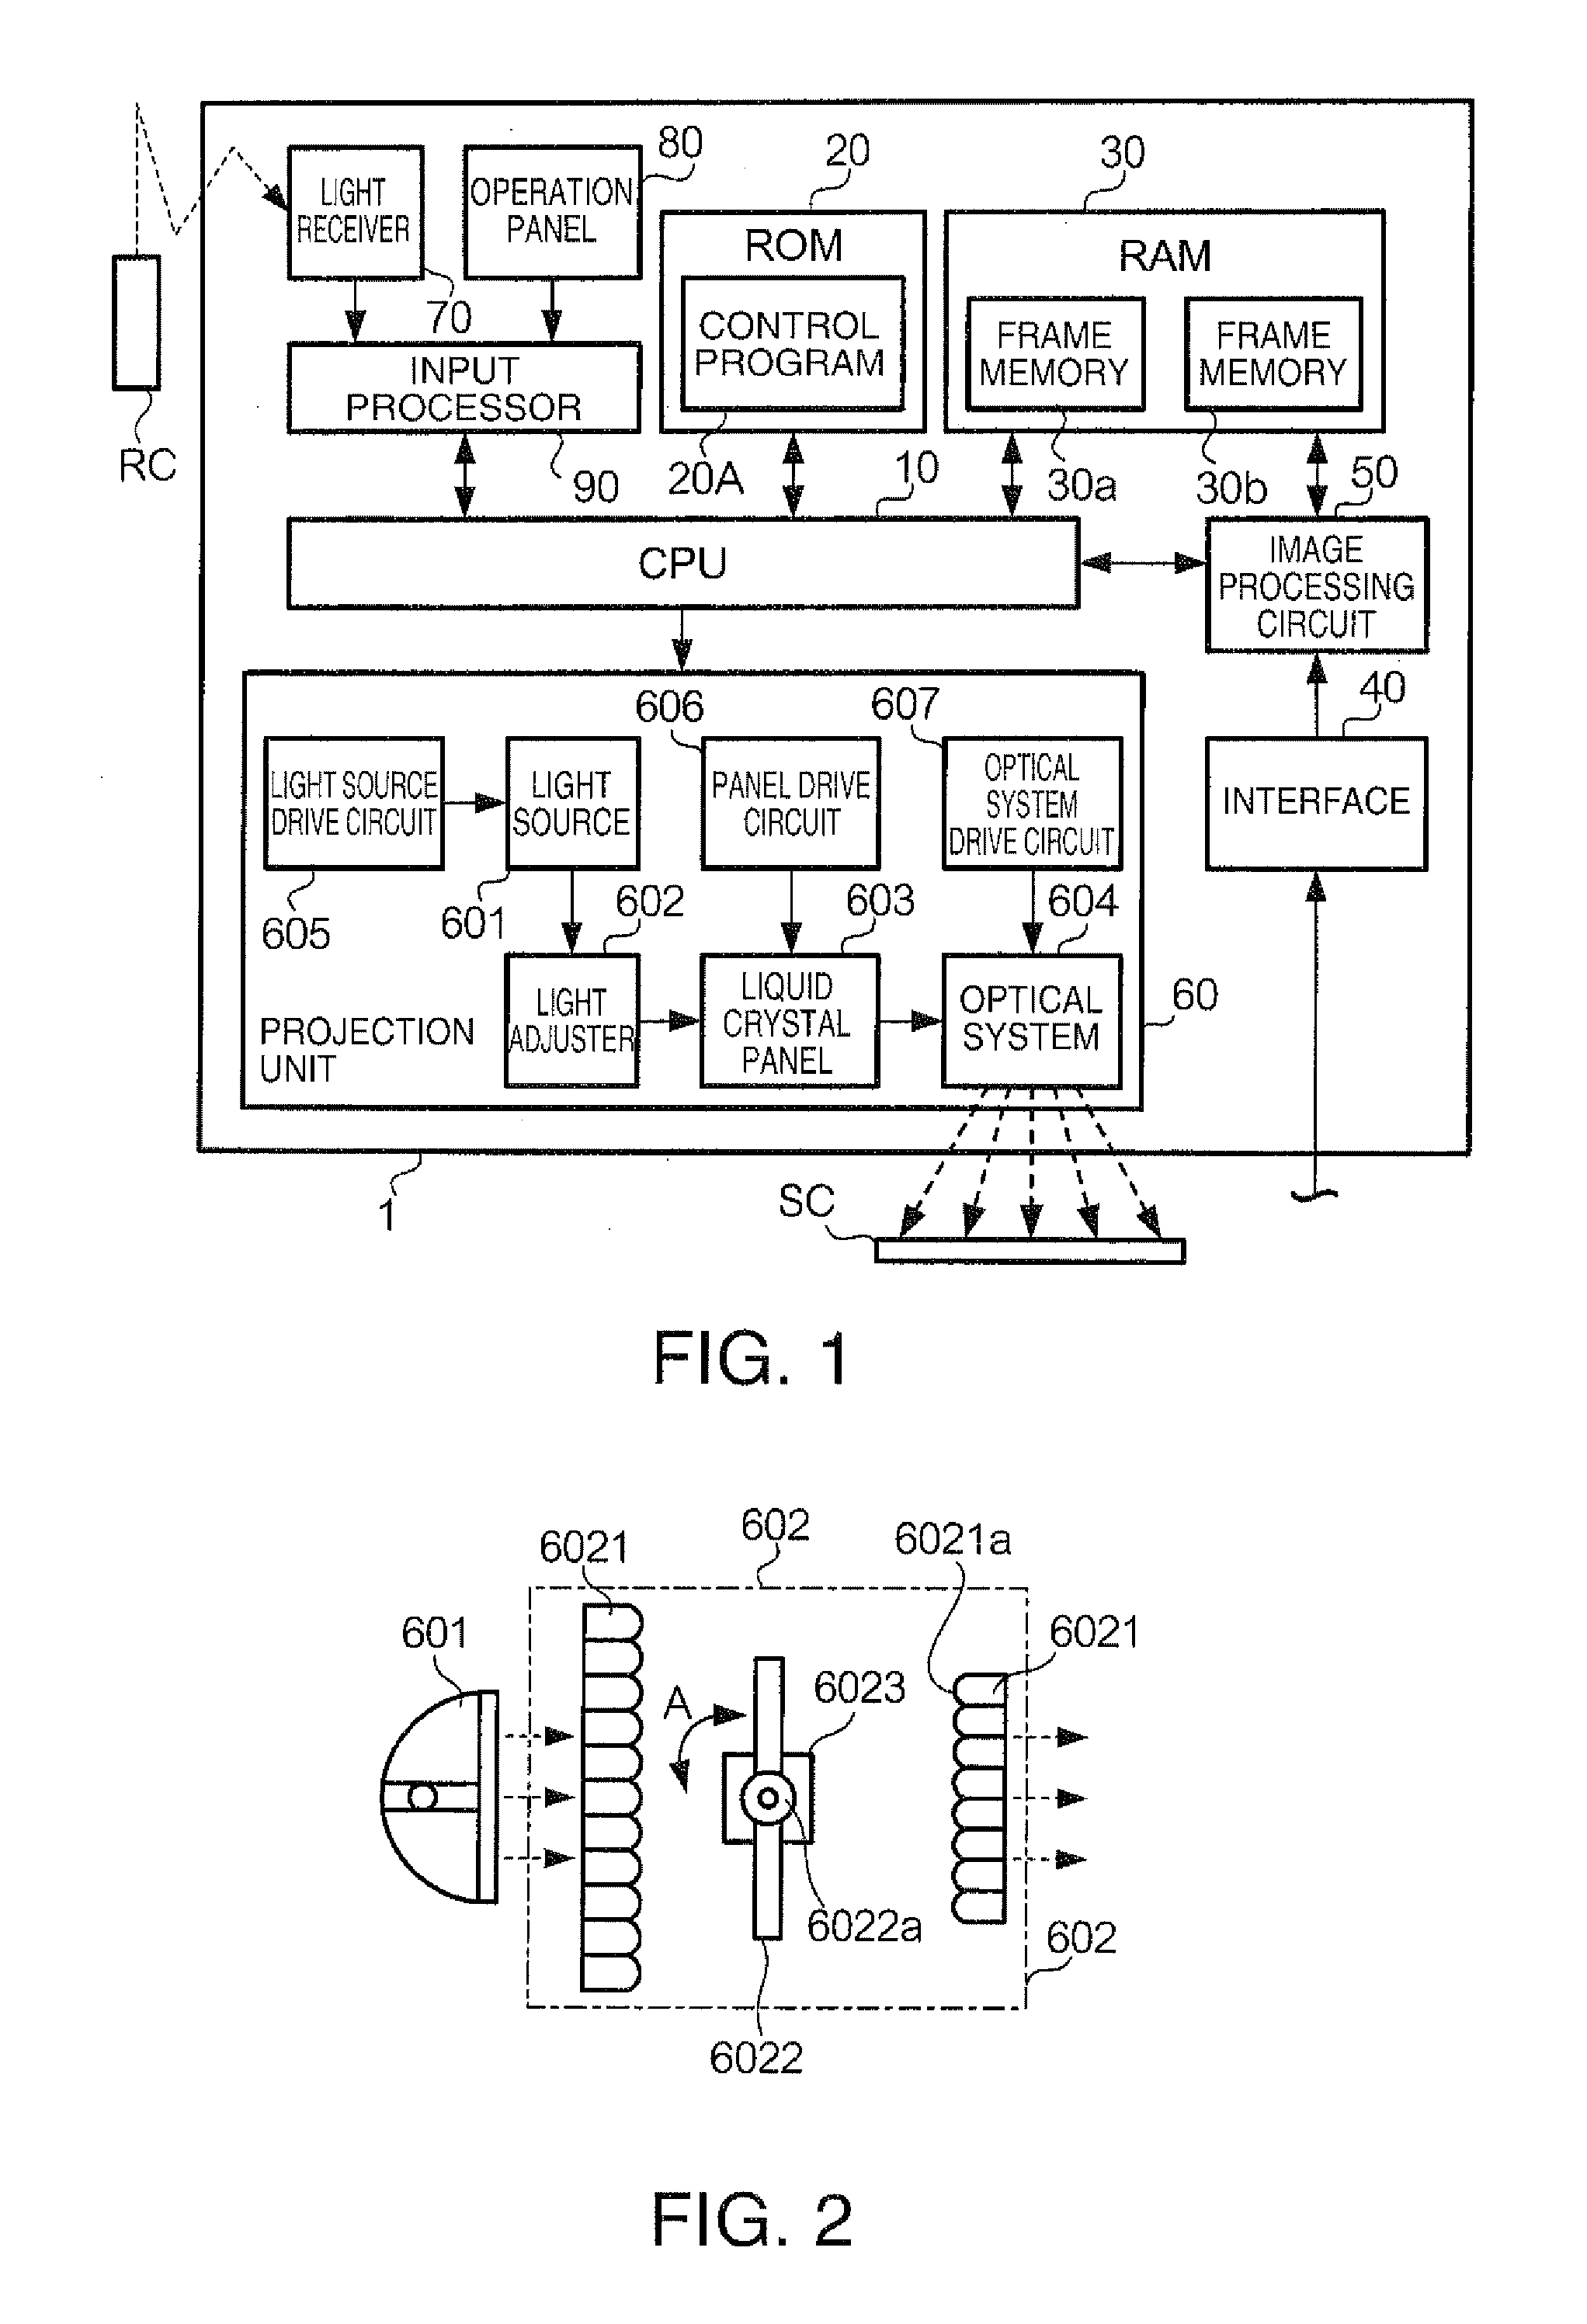 Image processing apparatus, projector, and image processing method